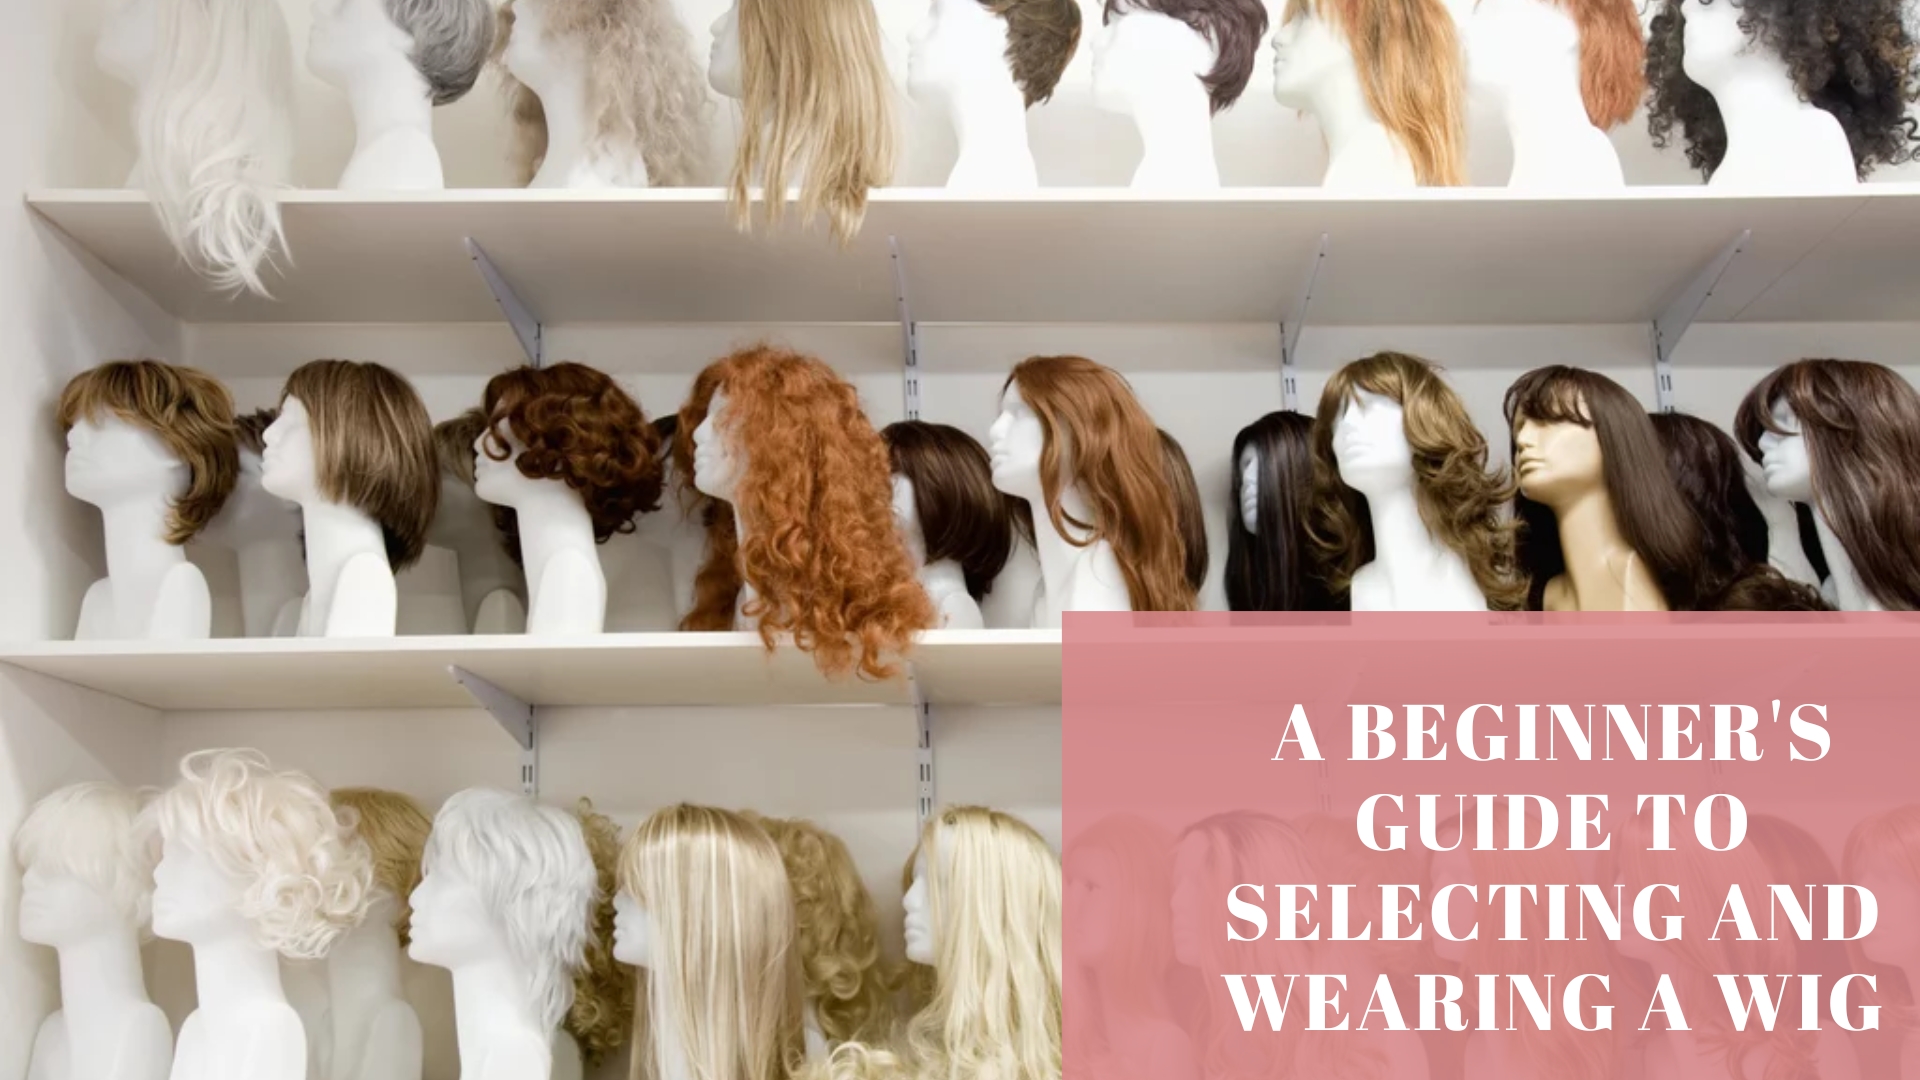 A Beginner’s Guide to Selecting and Wearing a Wig